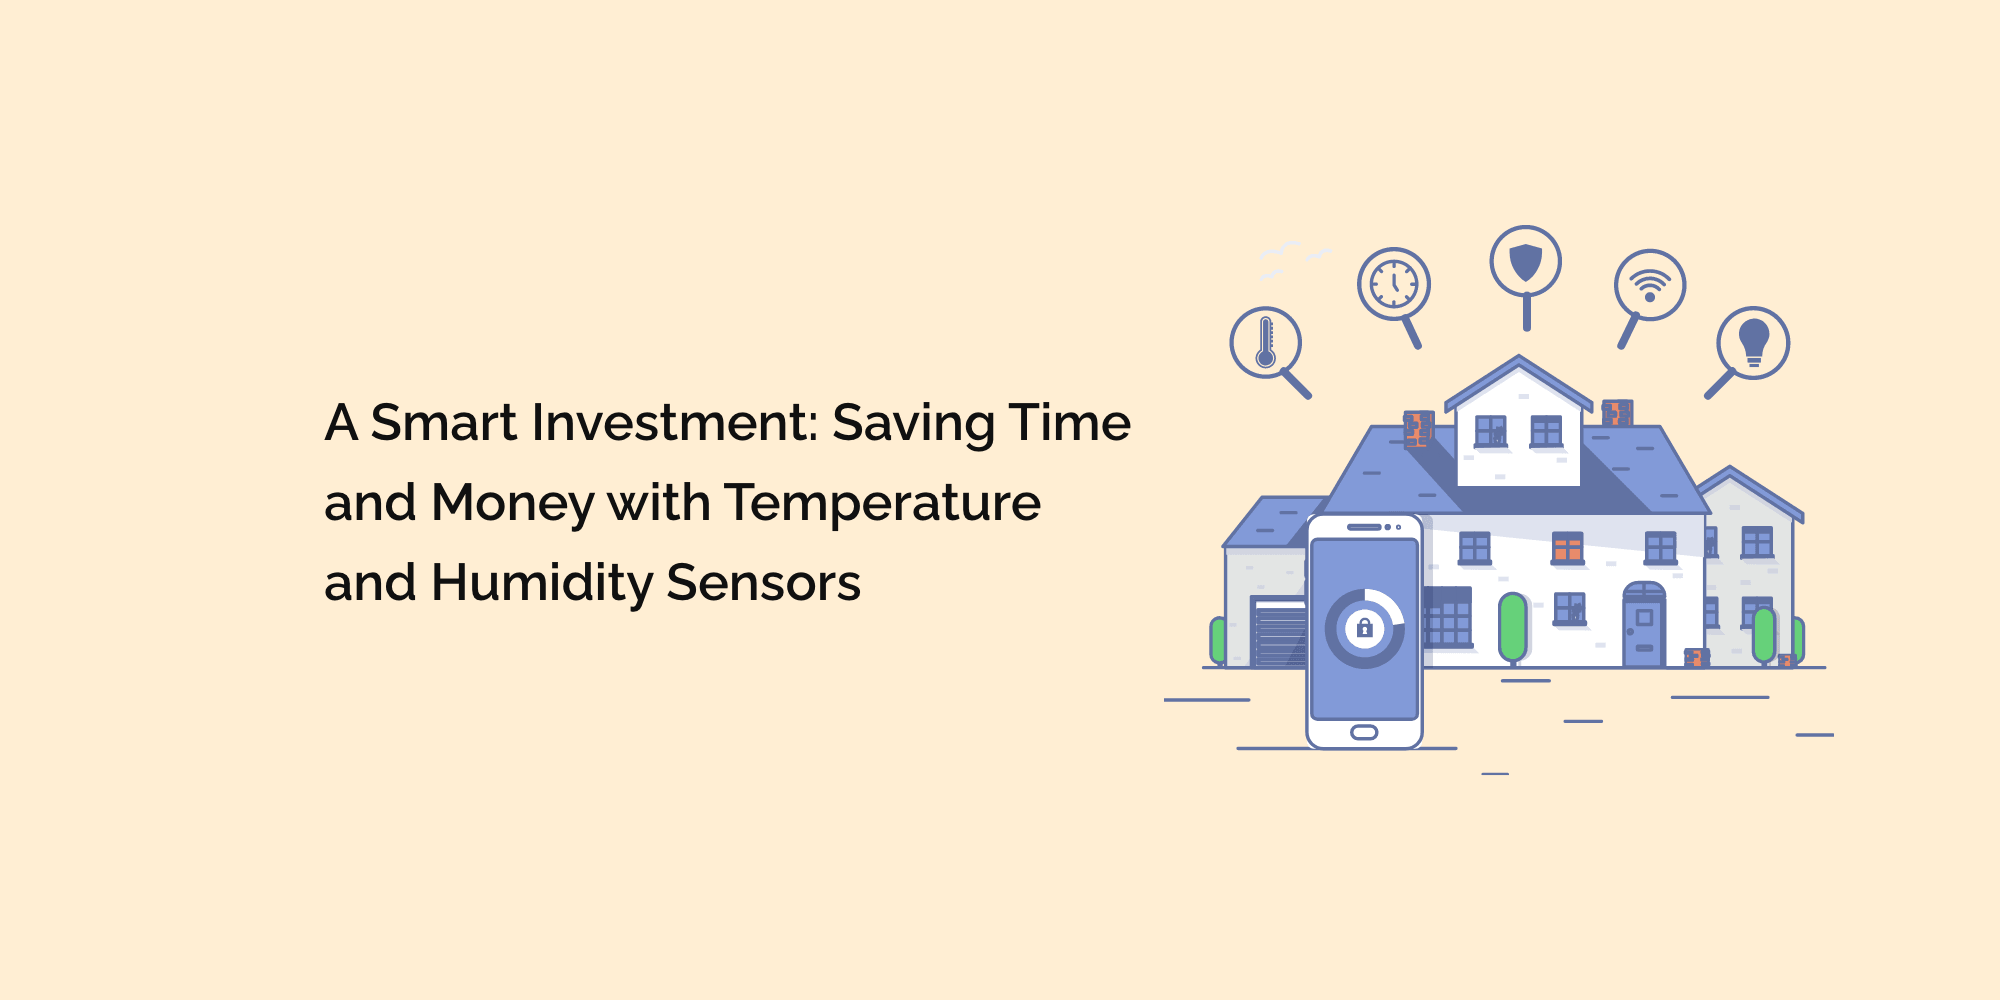 A Smart Investment: Saving Time and Money with Temperature and Humidity Sensors